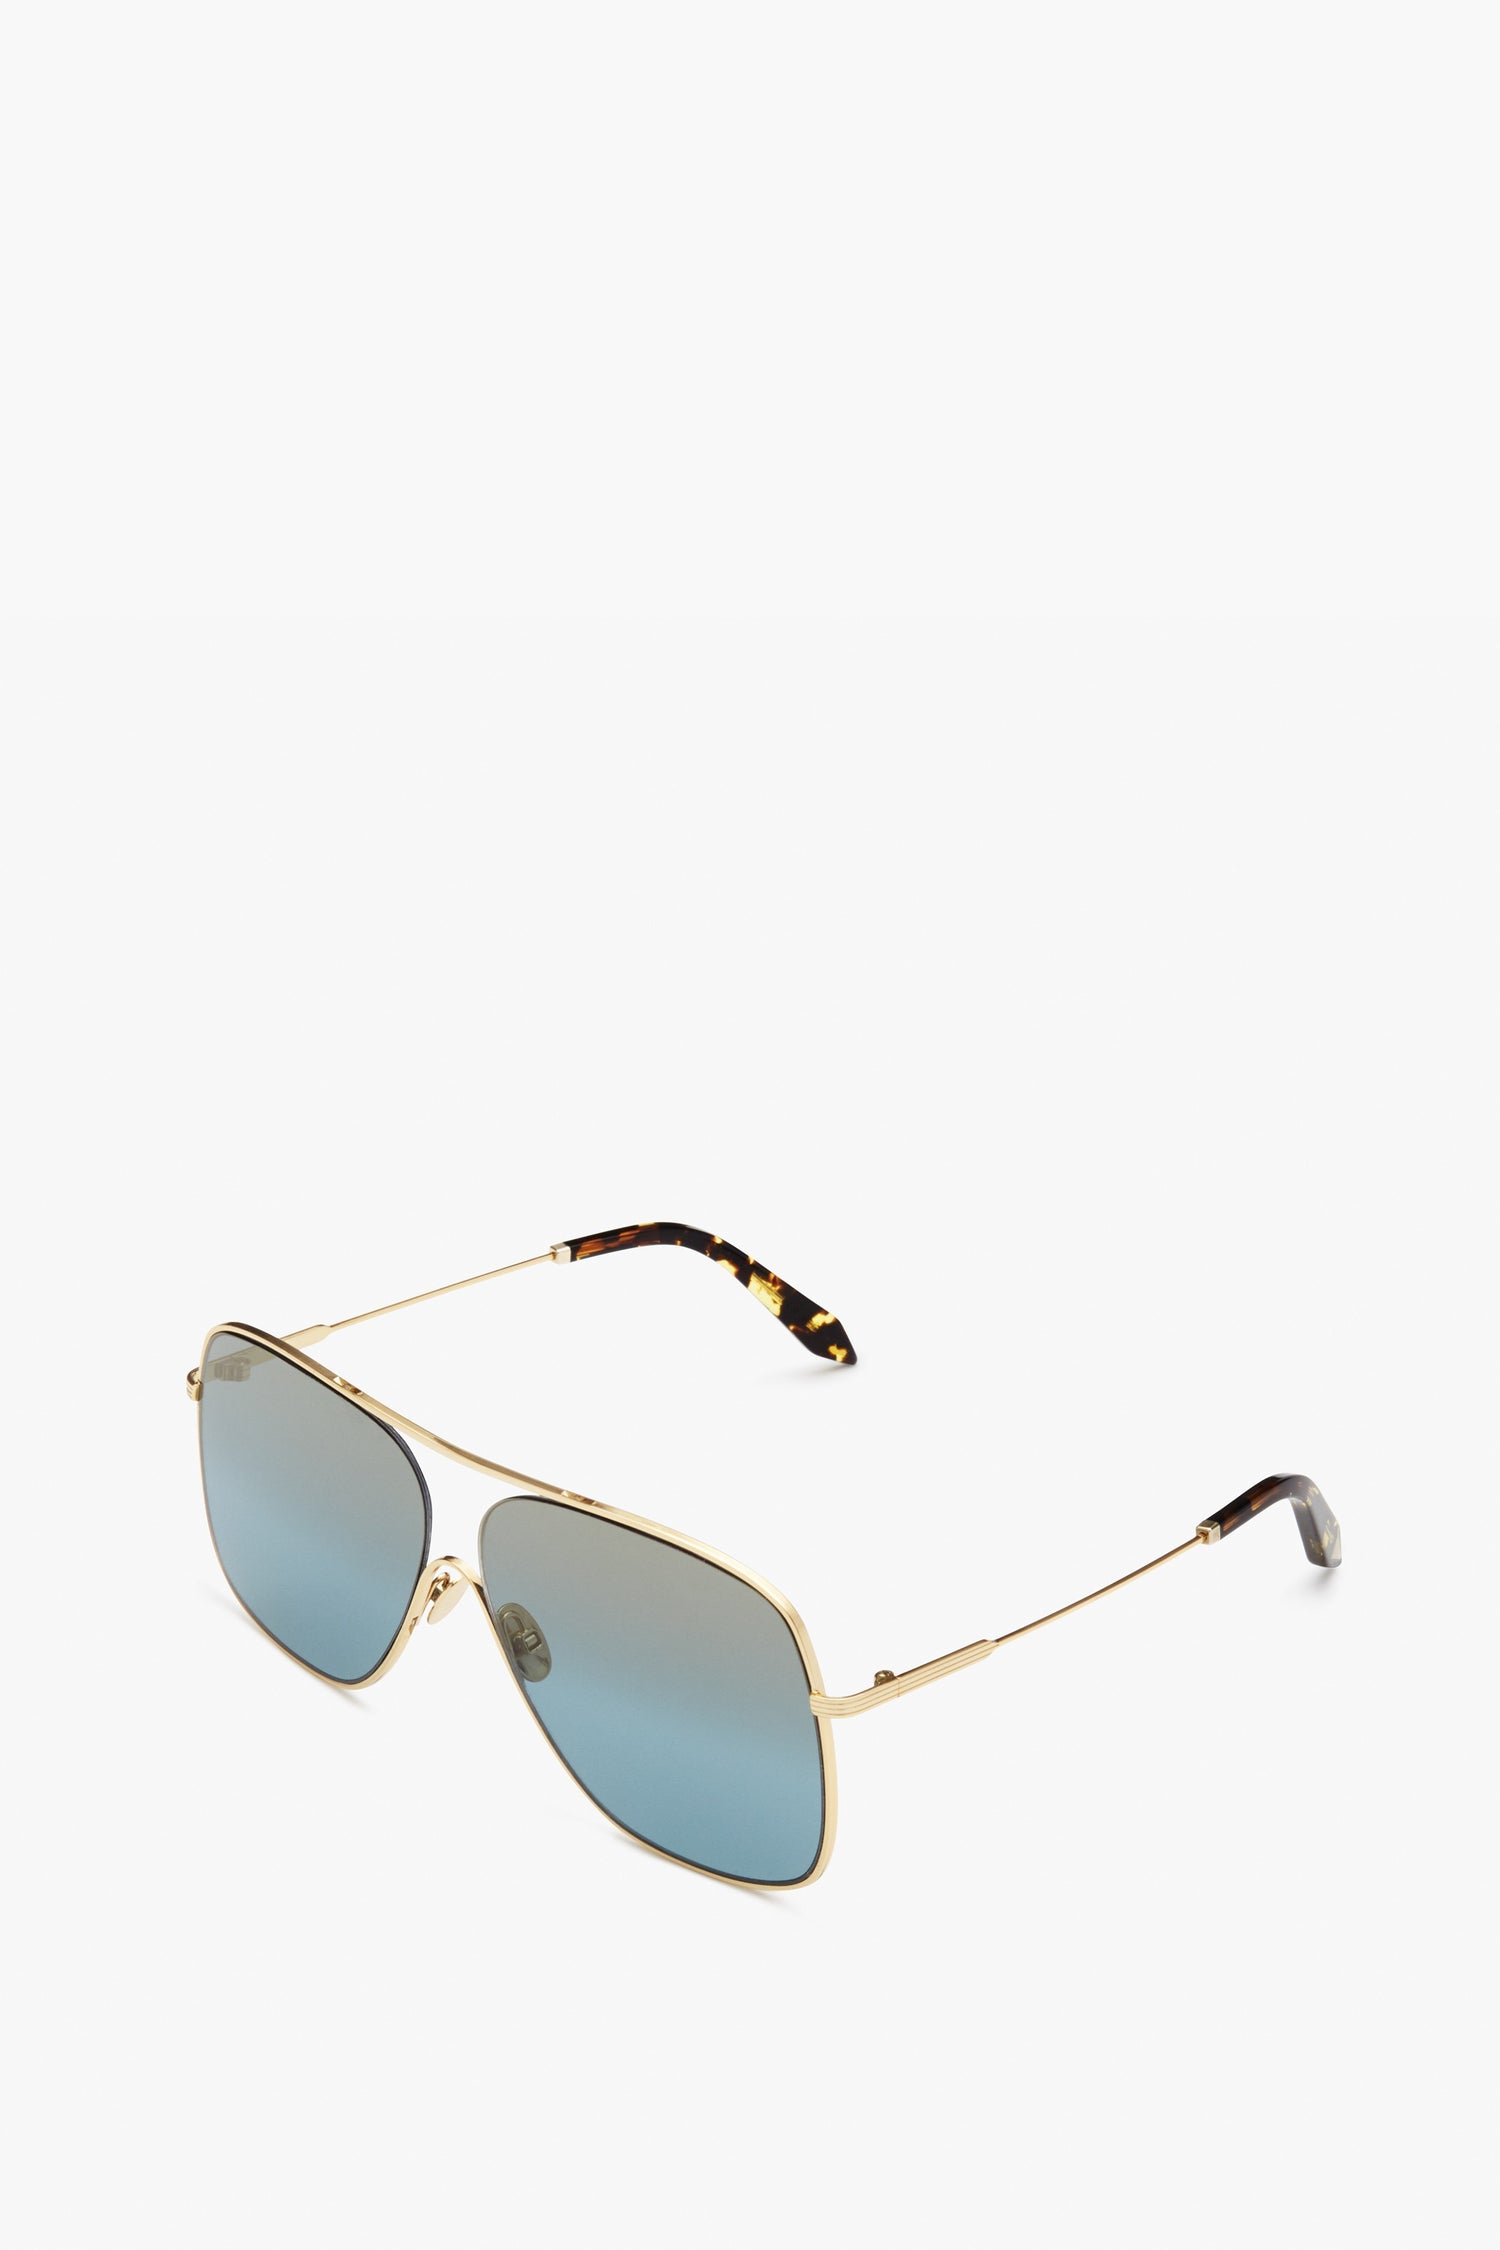 Loop Navigator in Celeste by Victoria Beckham with gold frames, light blue rectangular lenses, and thin arms featuring a tortoiseshell pattern on the tips, made in Italy, set on a white background.